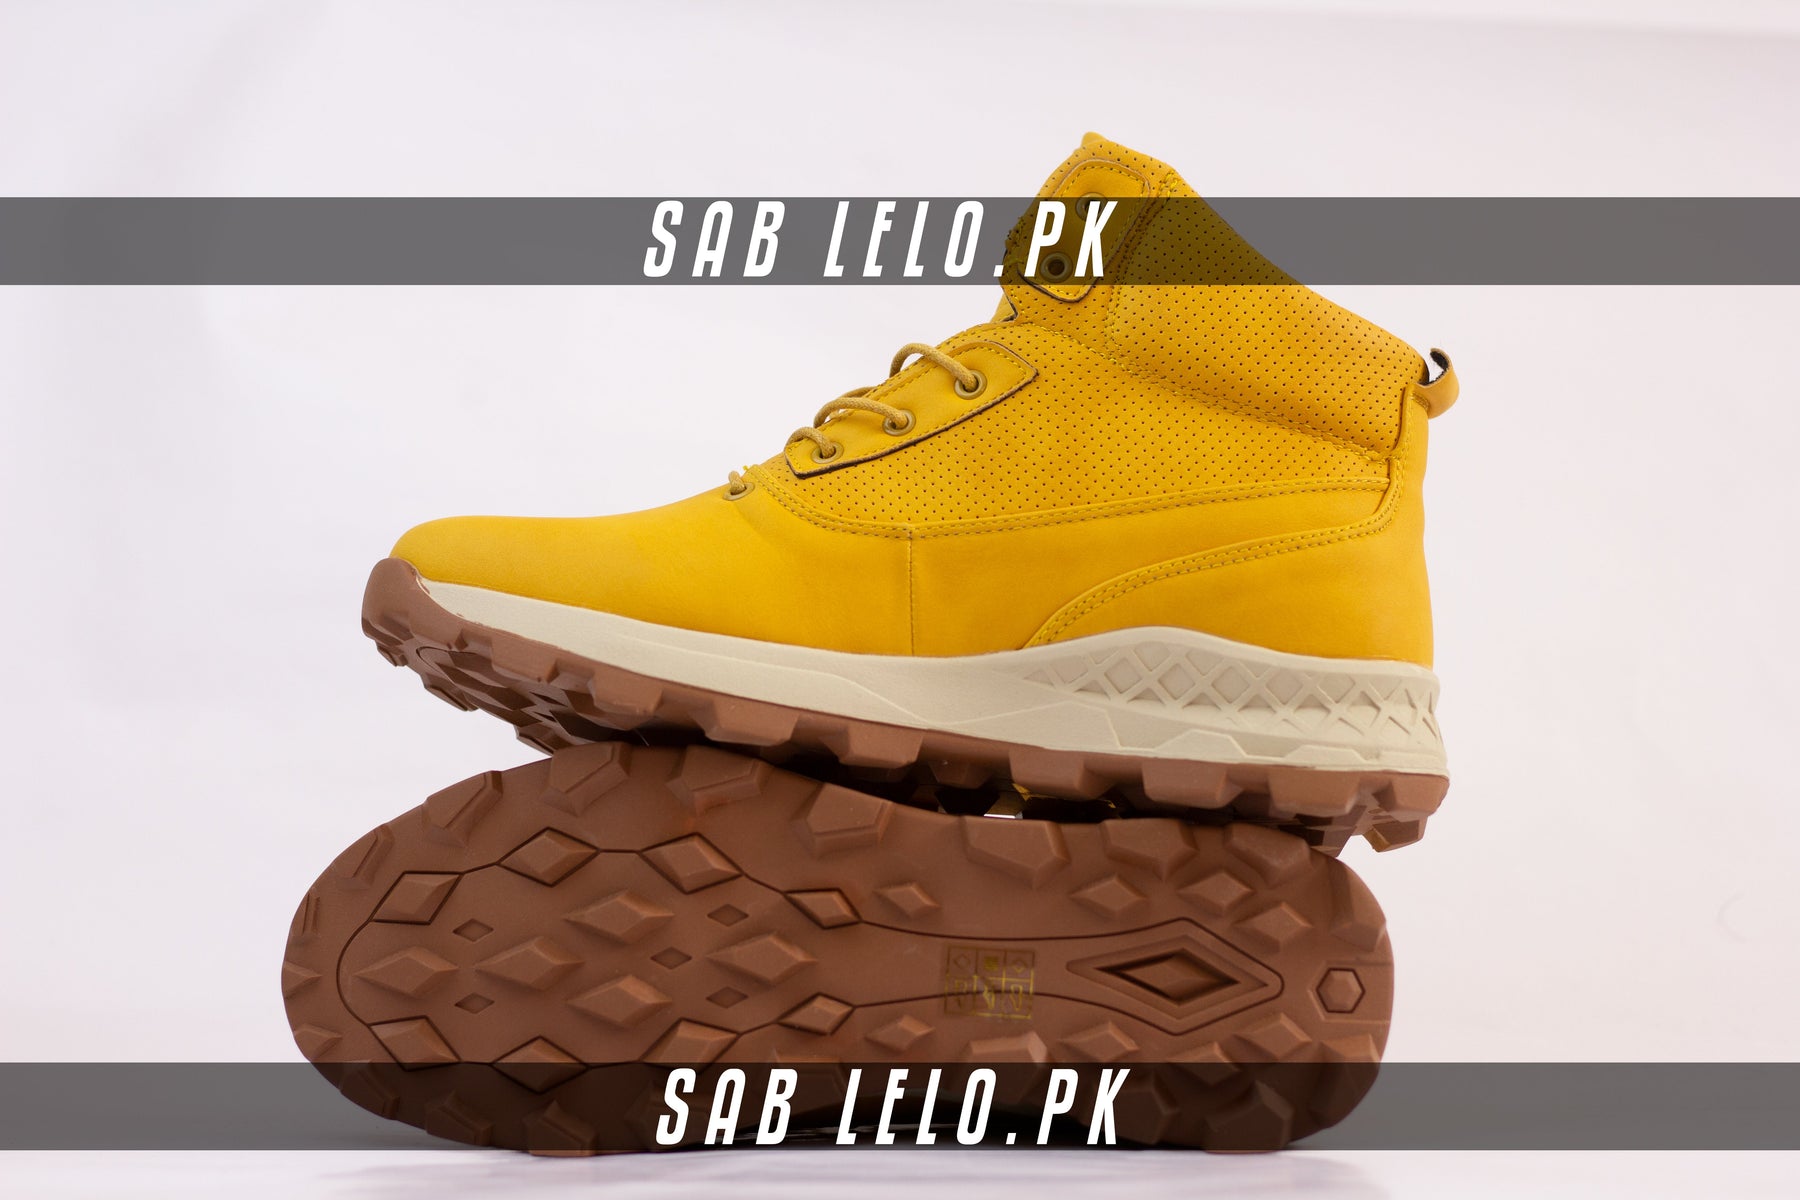 Timberland Shoes Camel - Premium Shoes from Sablelo.pk - Just Rs.3499! Shop now at Sablelo.pk